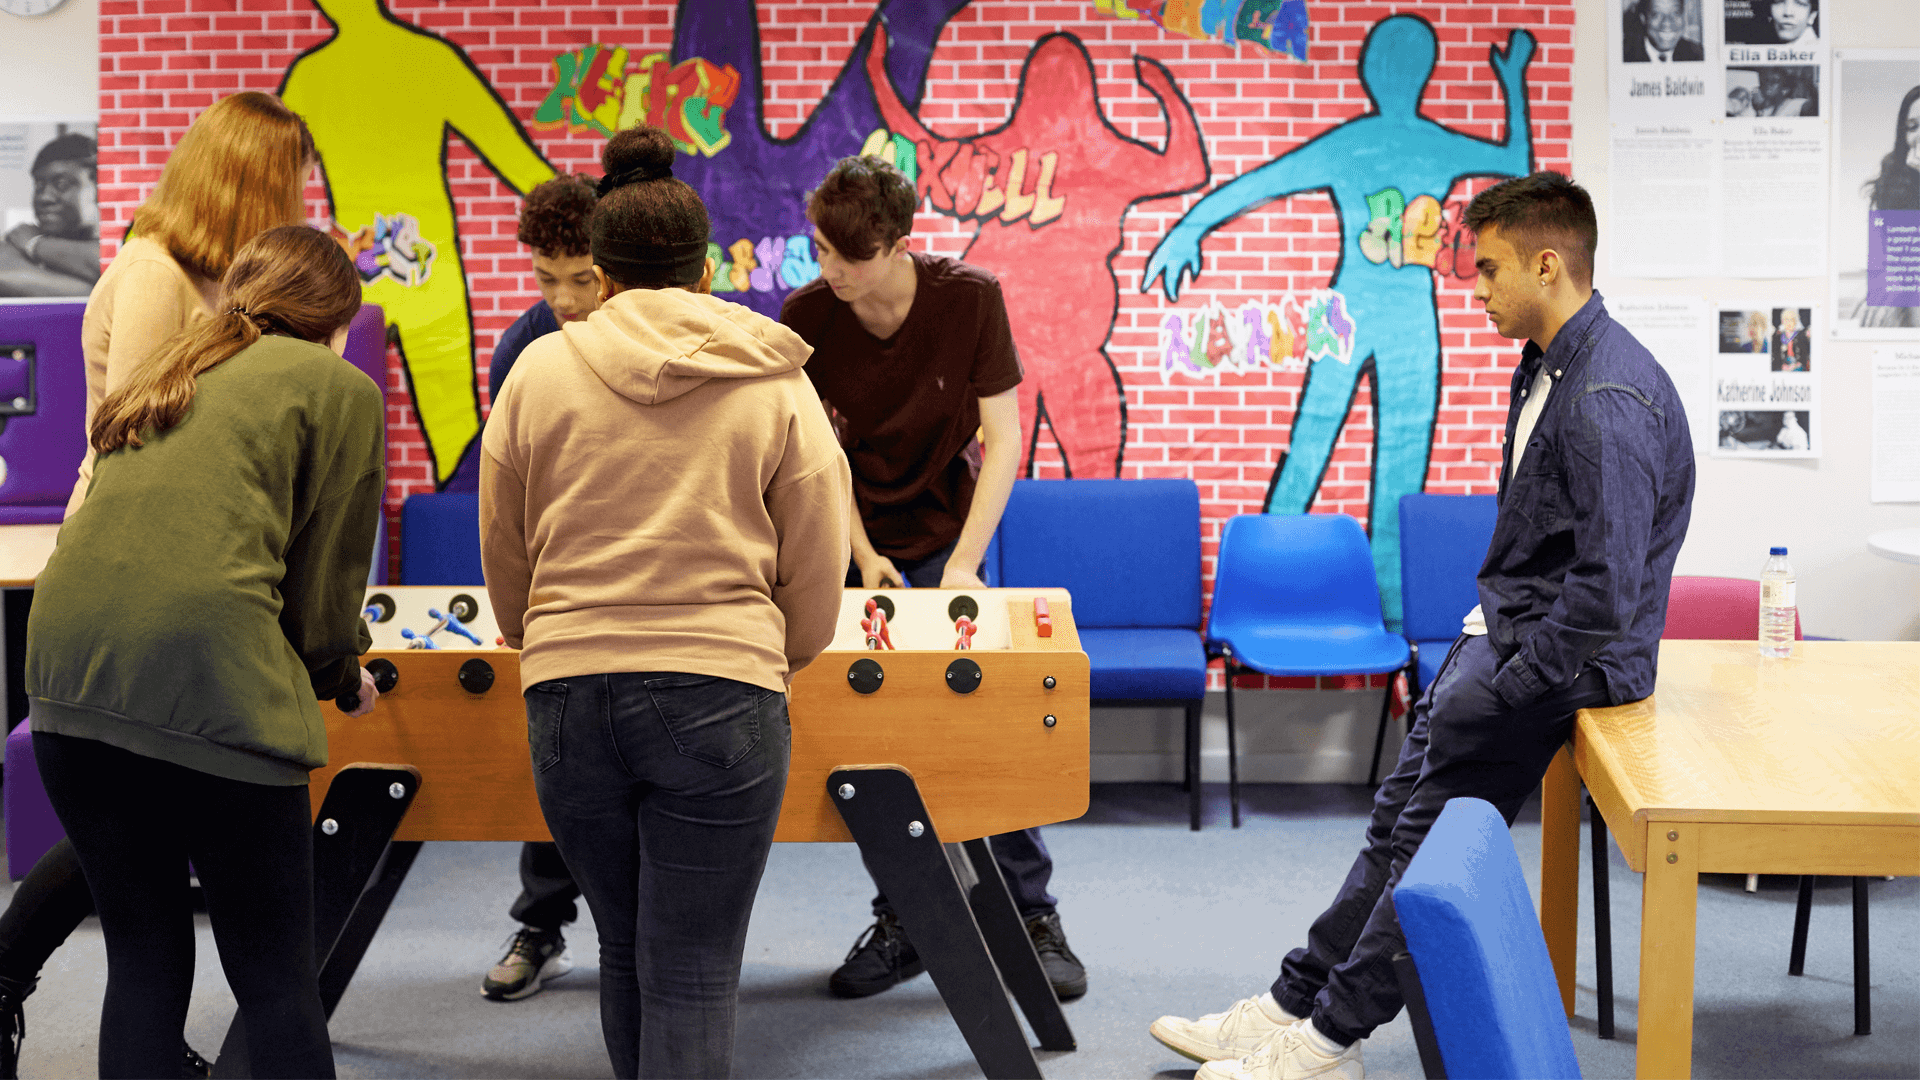 Six young people playing table football in a youth club.